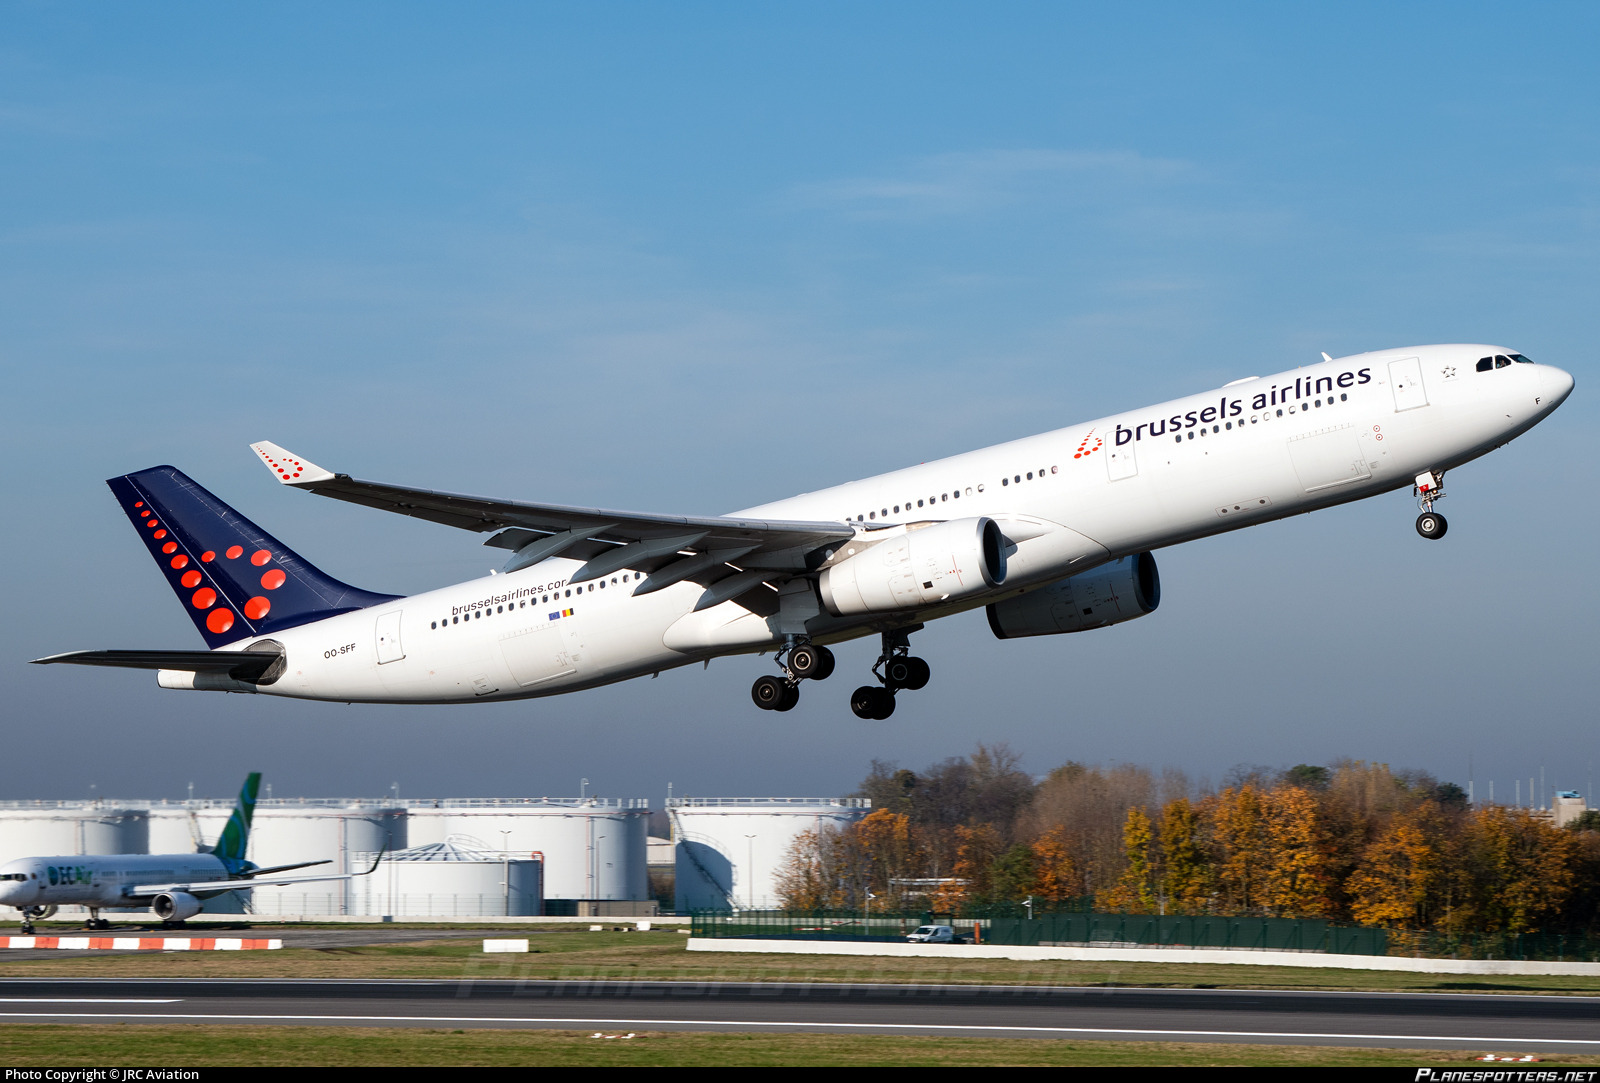 Brussels Airlines' Pilots Set To Strike On January 13th